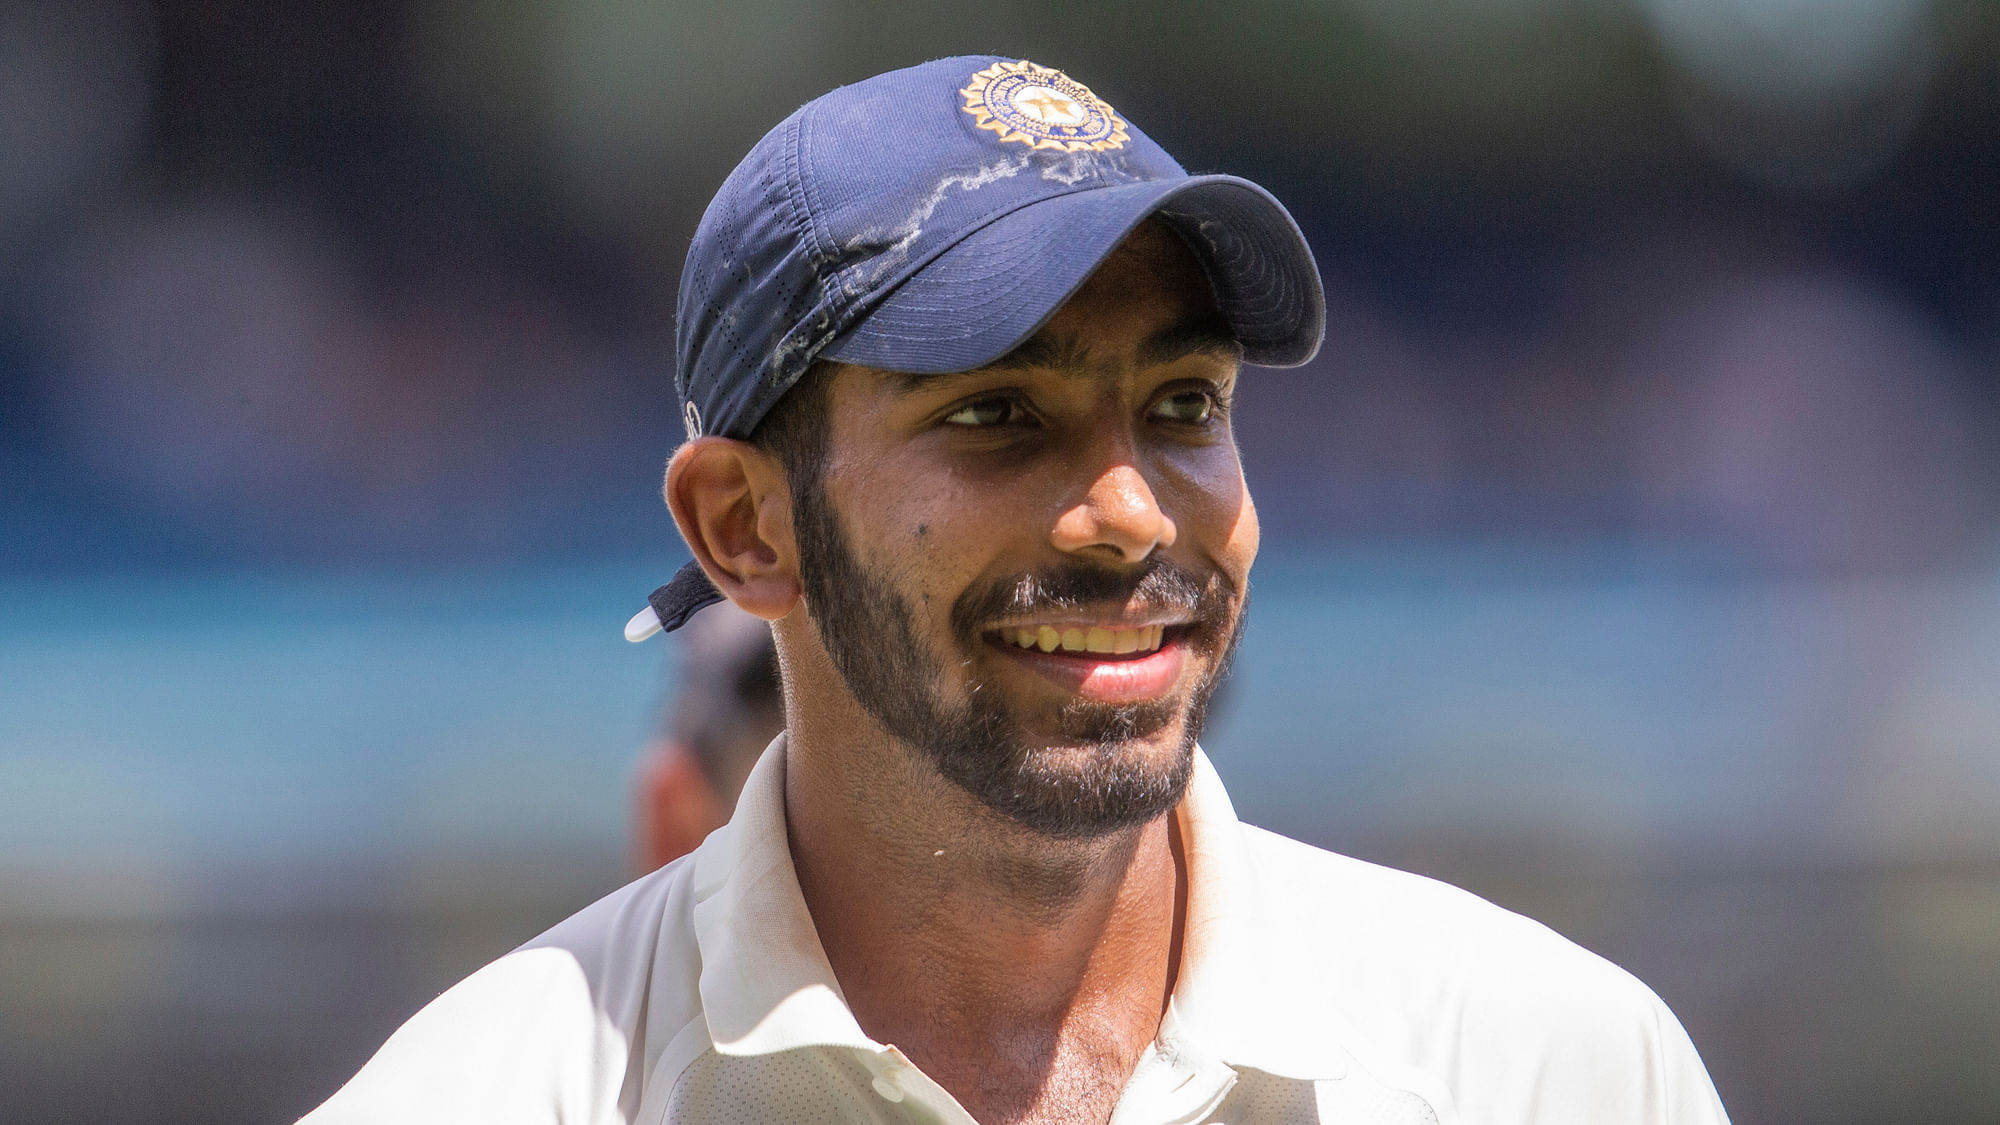 Jasprit Bumrah’s efforts have now earned worldwide praise especially from his peers and the scouts.